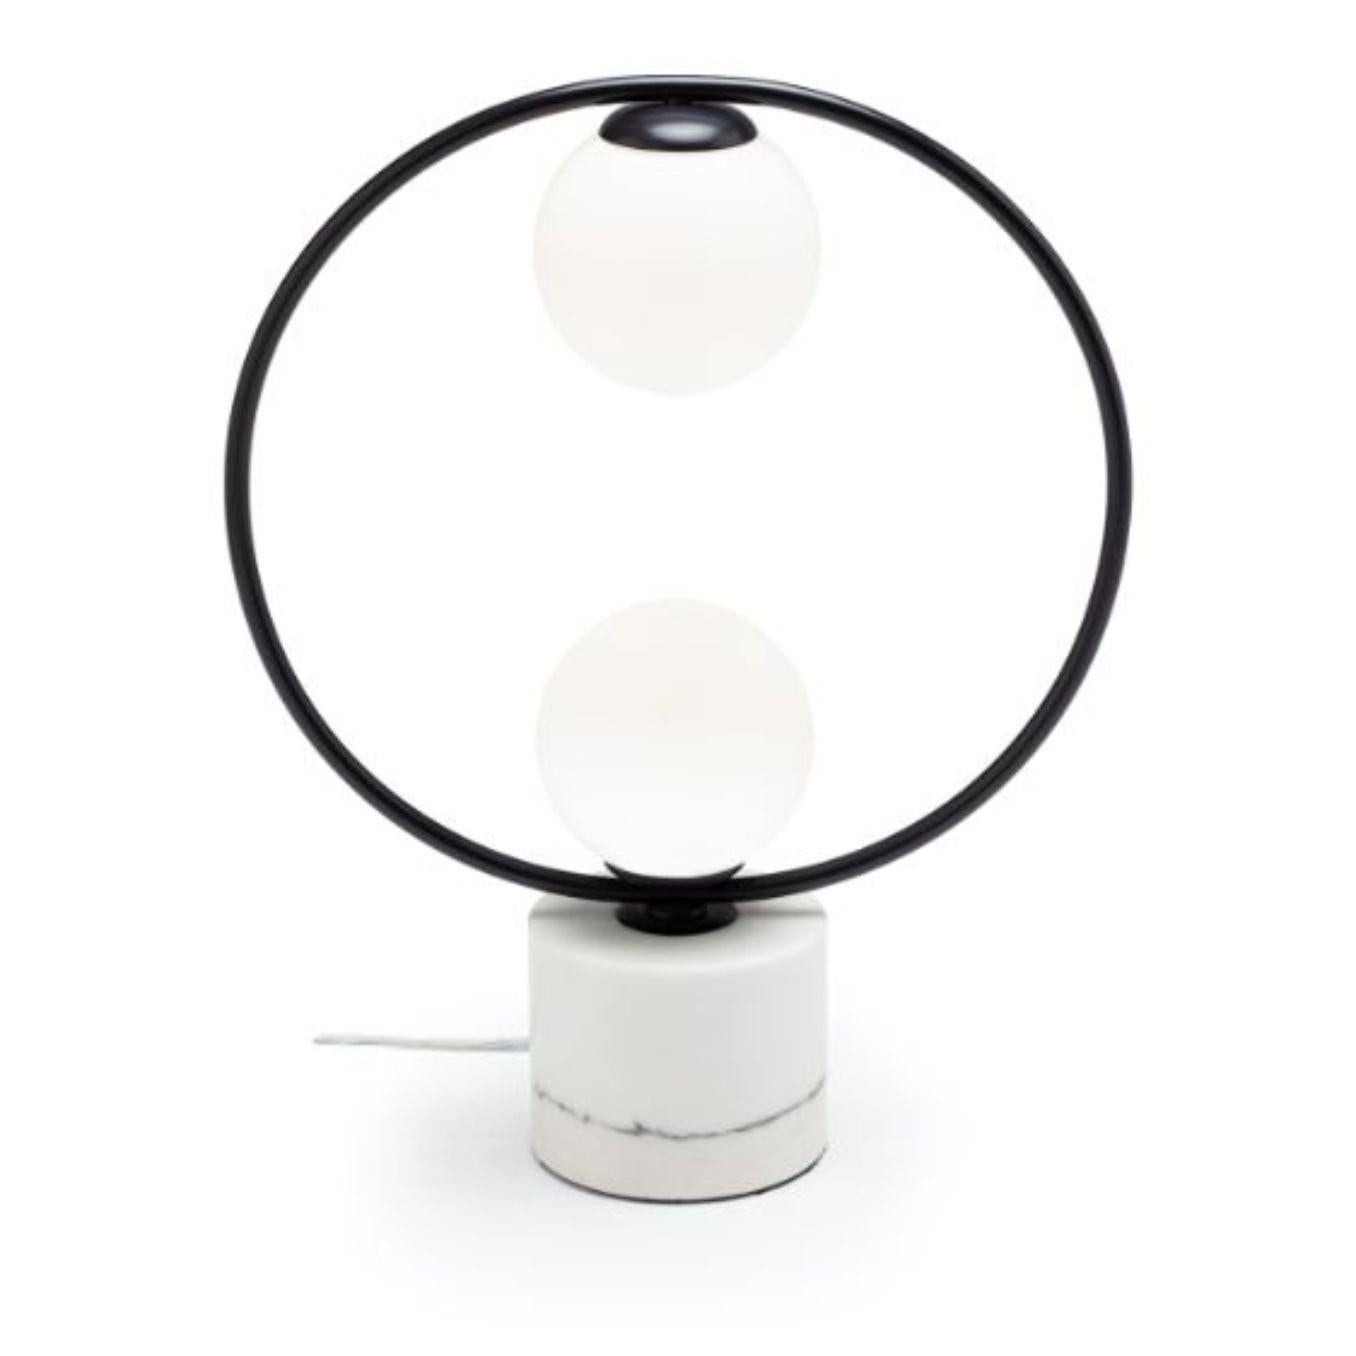 Blackloop table II lamp with marble base by Dooq.
Dimensions: W 43 x D 15 x H 53 cm.
Materials: lacquered metal, polished or brushed metal, marble.
Also available in different colours and materials.

Information:
230V/50Hz
2 x max. G9
4W